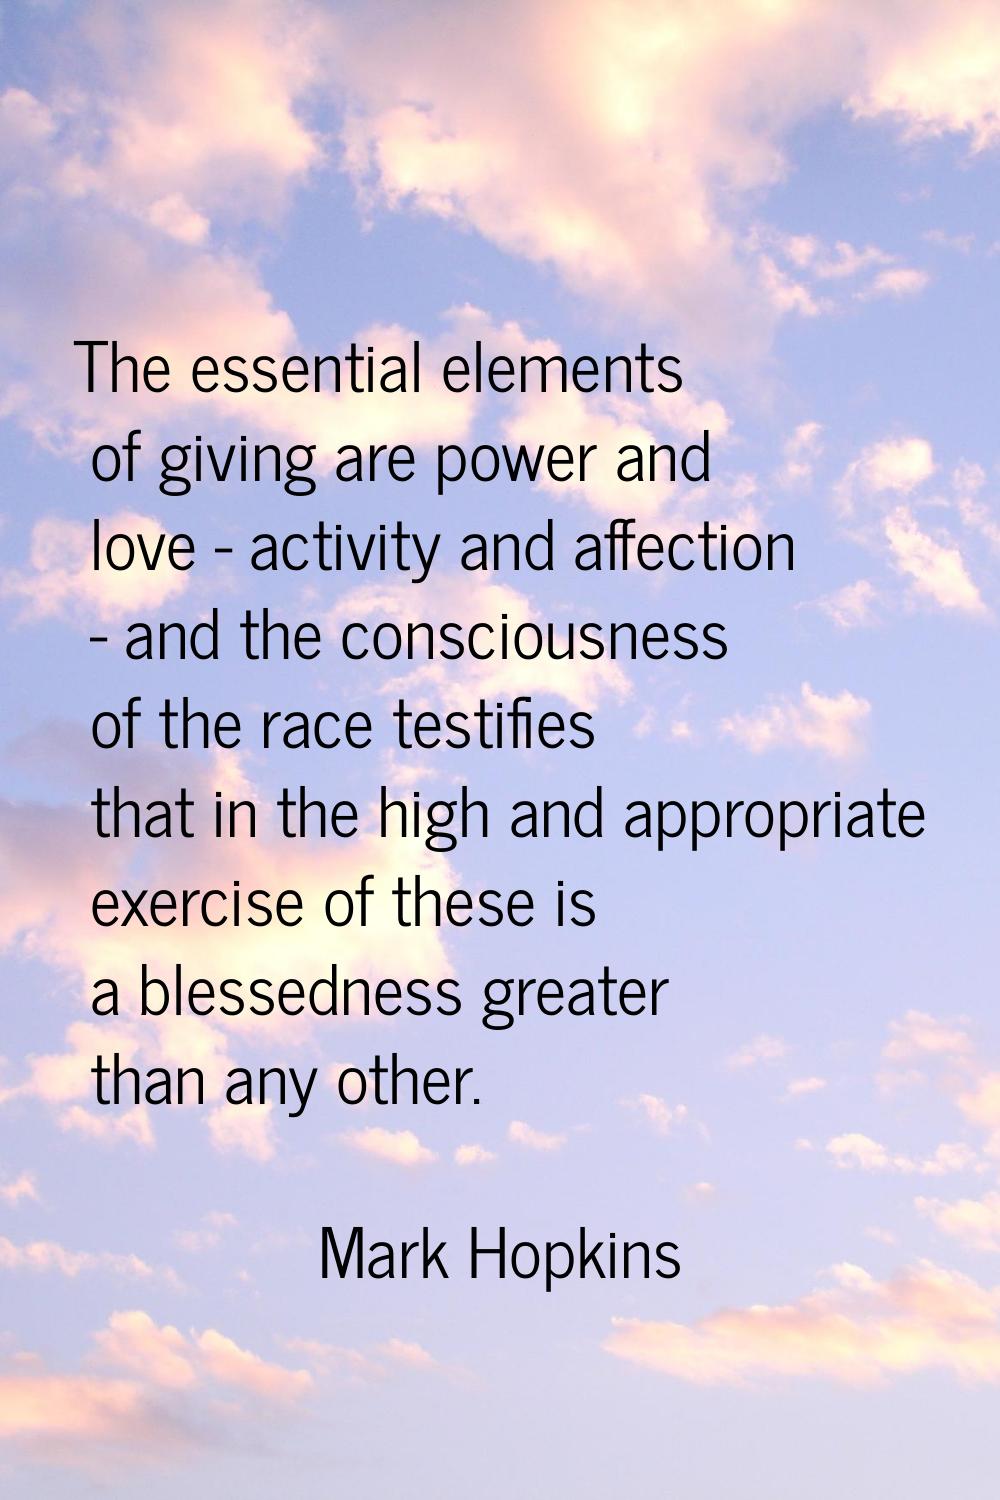 The essential elements of giving are power and love - activity and affection - and the consciousnes